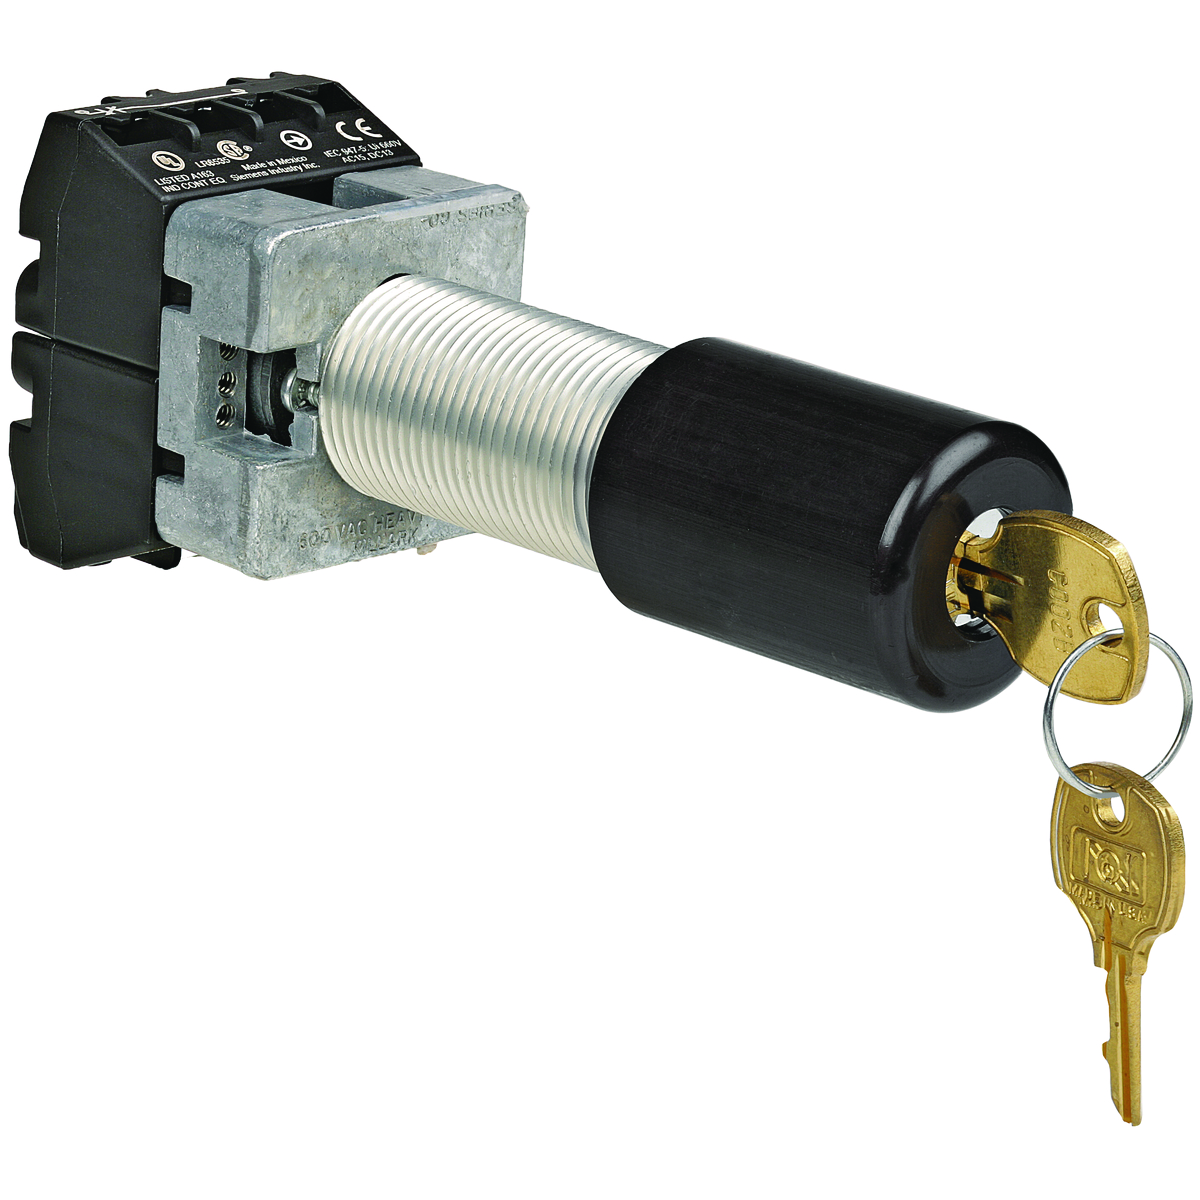 G SERIES - ALUMINUM LONG SPRING RETURNED 3-POSITION KEYED SELECTORSWITCH OPERATOR - SPRING RETURN TO CENTER FROM RIGHT OR LEFT - KEYEDDIFFERENT WITH KEY REMOVAL IN CENTER POSITION - 